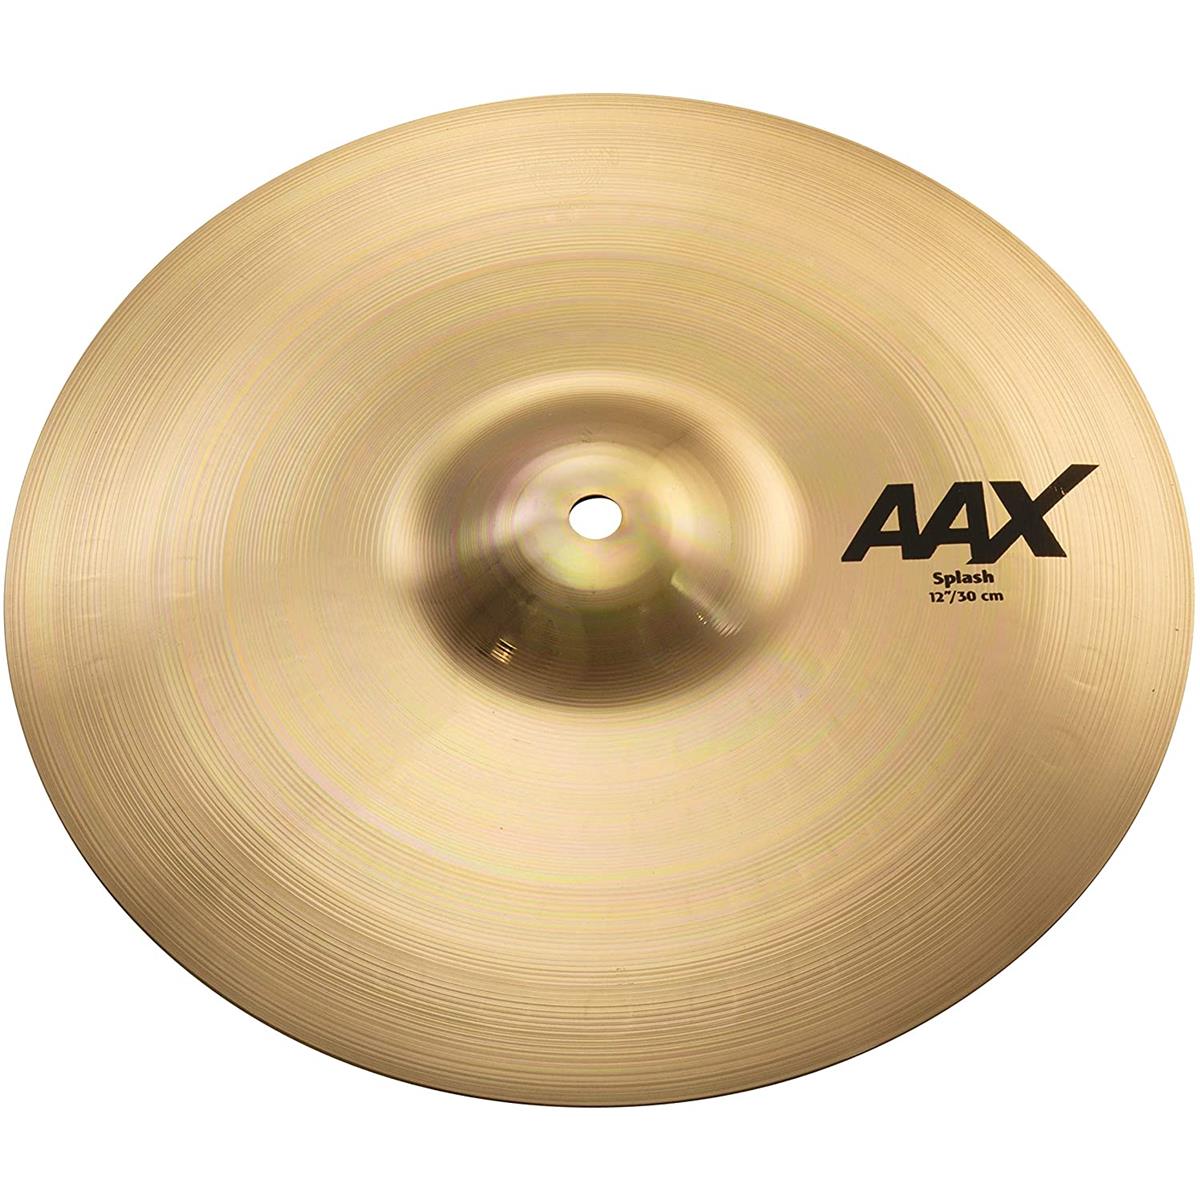 Sabian 12" AAX Splash Cymbal, Extra-Thin, Brilliant Finish Extremely fast and very bright, the SABIAN 12" AAX Splash provides plenty of penetrating cut. The SABIAN AAX series delivers consistently bright, crisp, clear and cutting responses - AAX is the ultimate Modern Bright sound!